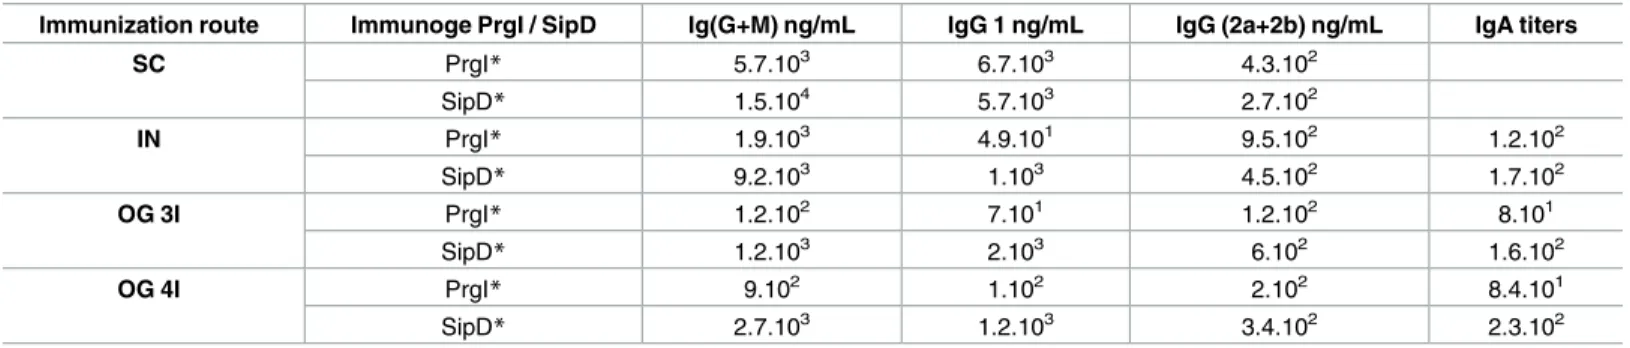 Table 1). Measurement of the IgG isotype concentrations in sera of immunized mice revealed that all main subclasses contributed to the humoral response whatever the route